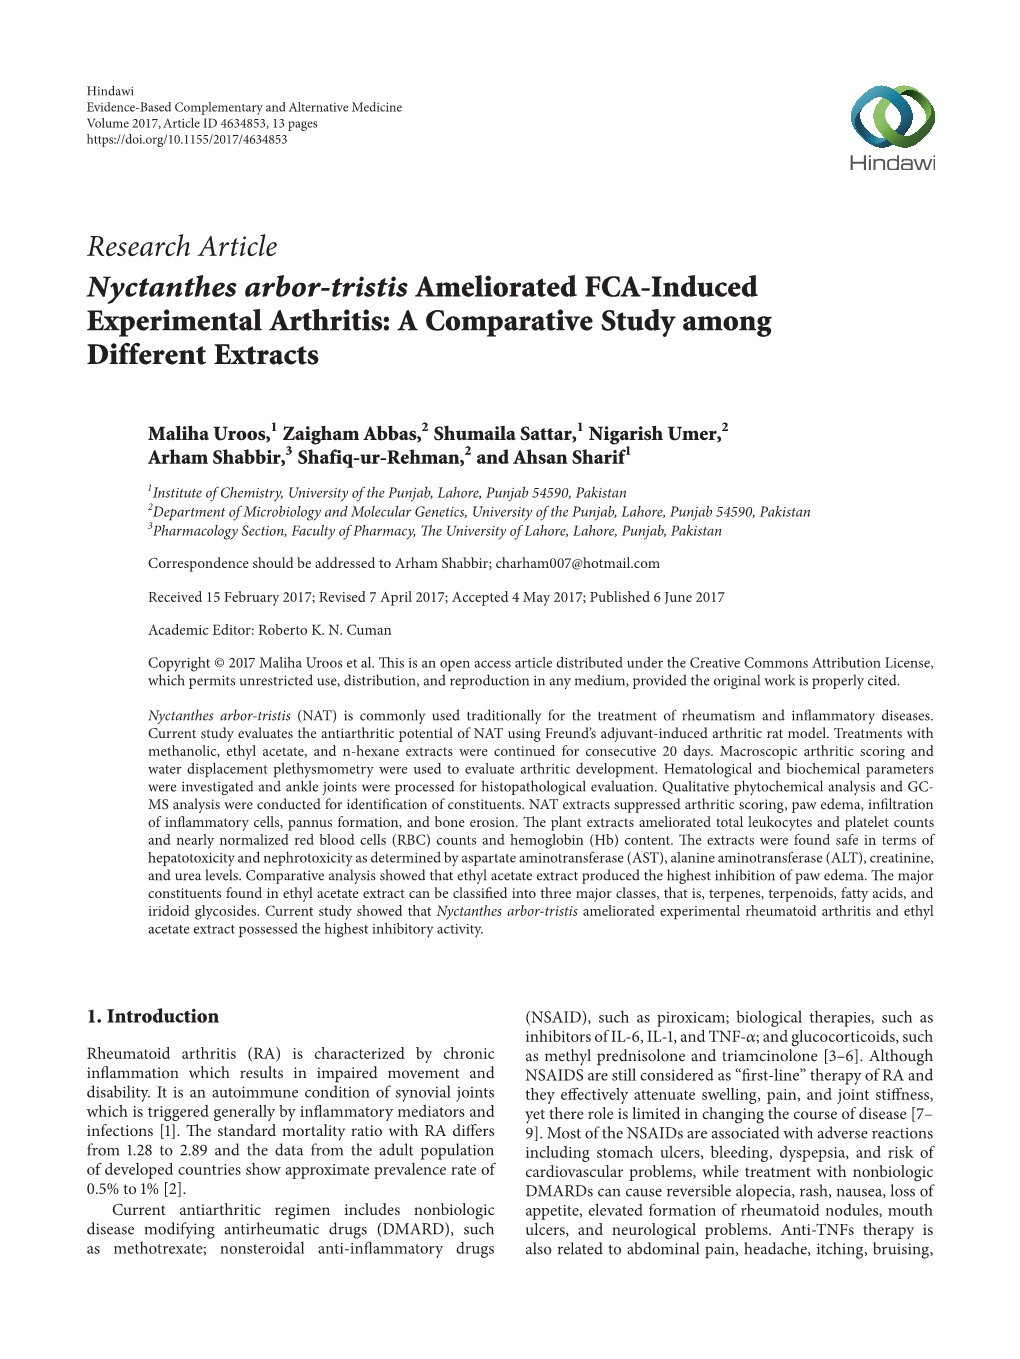 Research Article Nyctanthes Arbor-Tristis Ameliorated FCA-Induced Experimental Arthritis: a Comparative Study Among Different Extracts